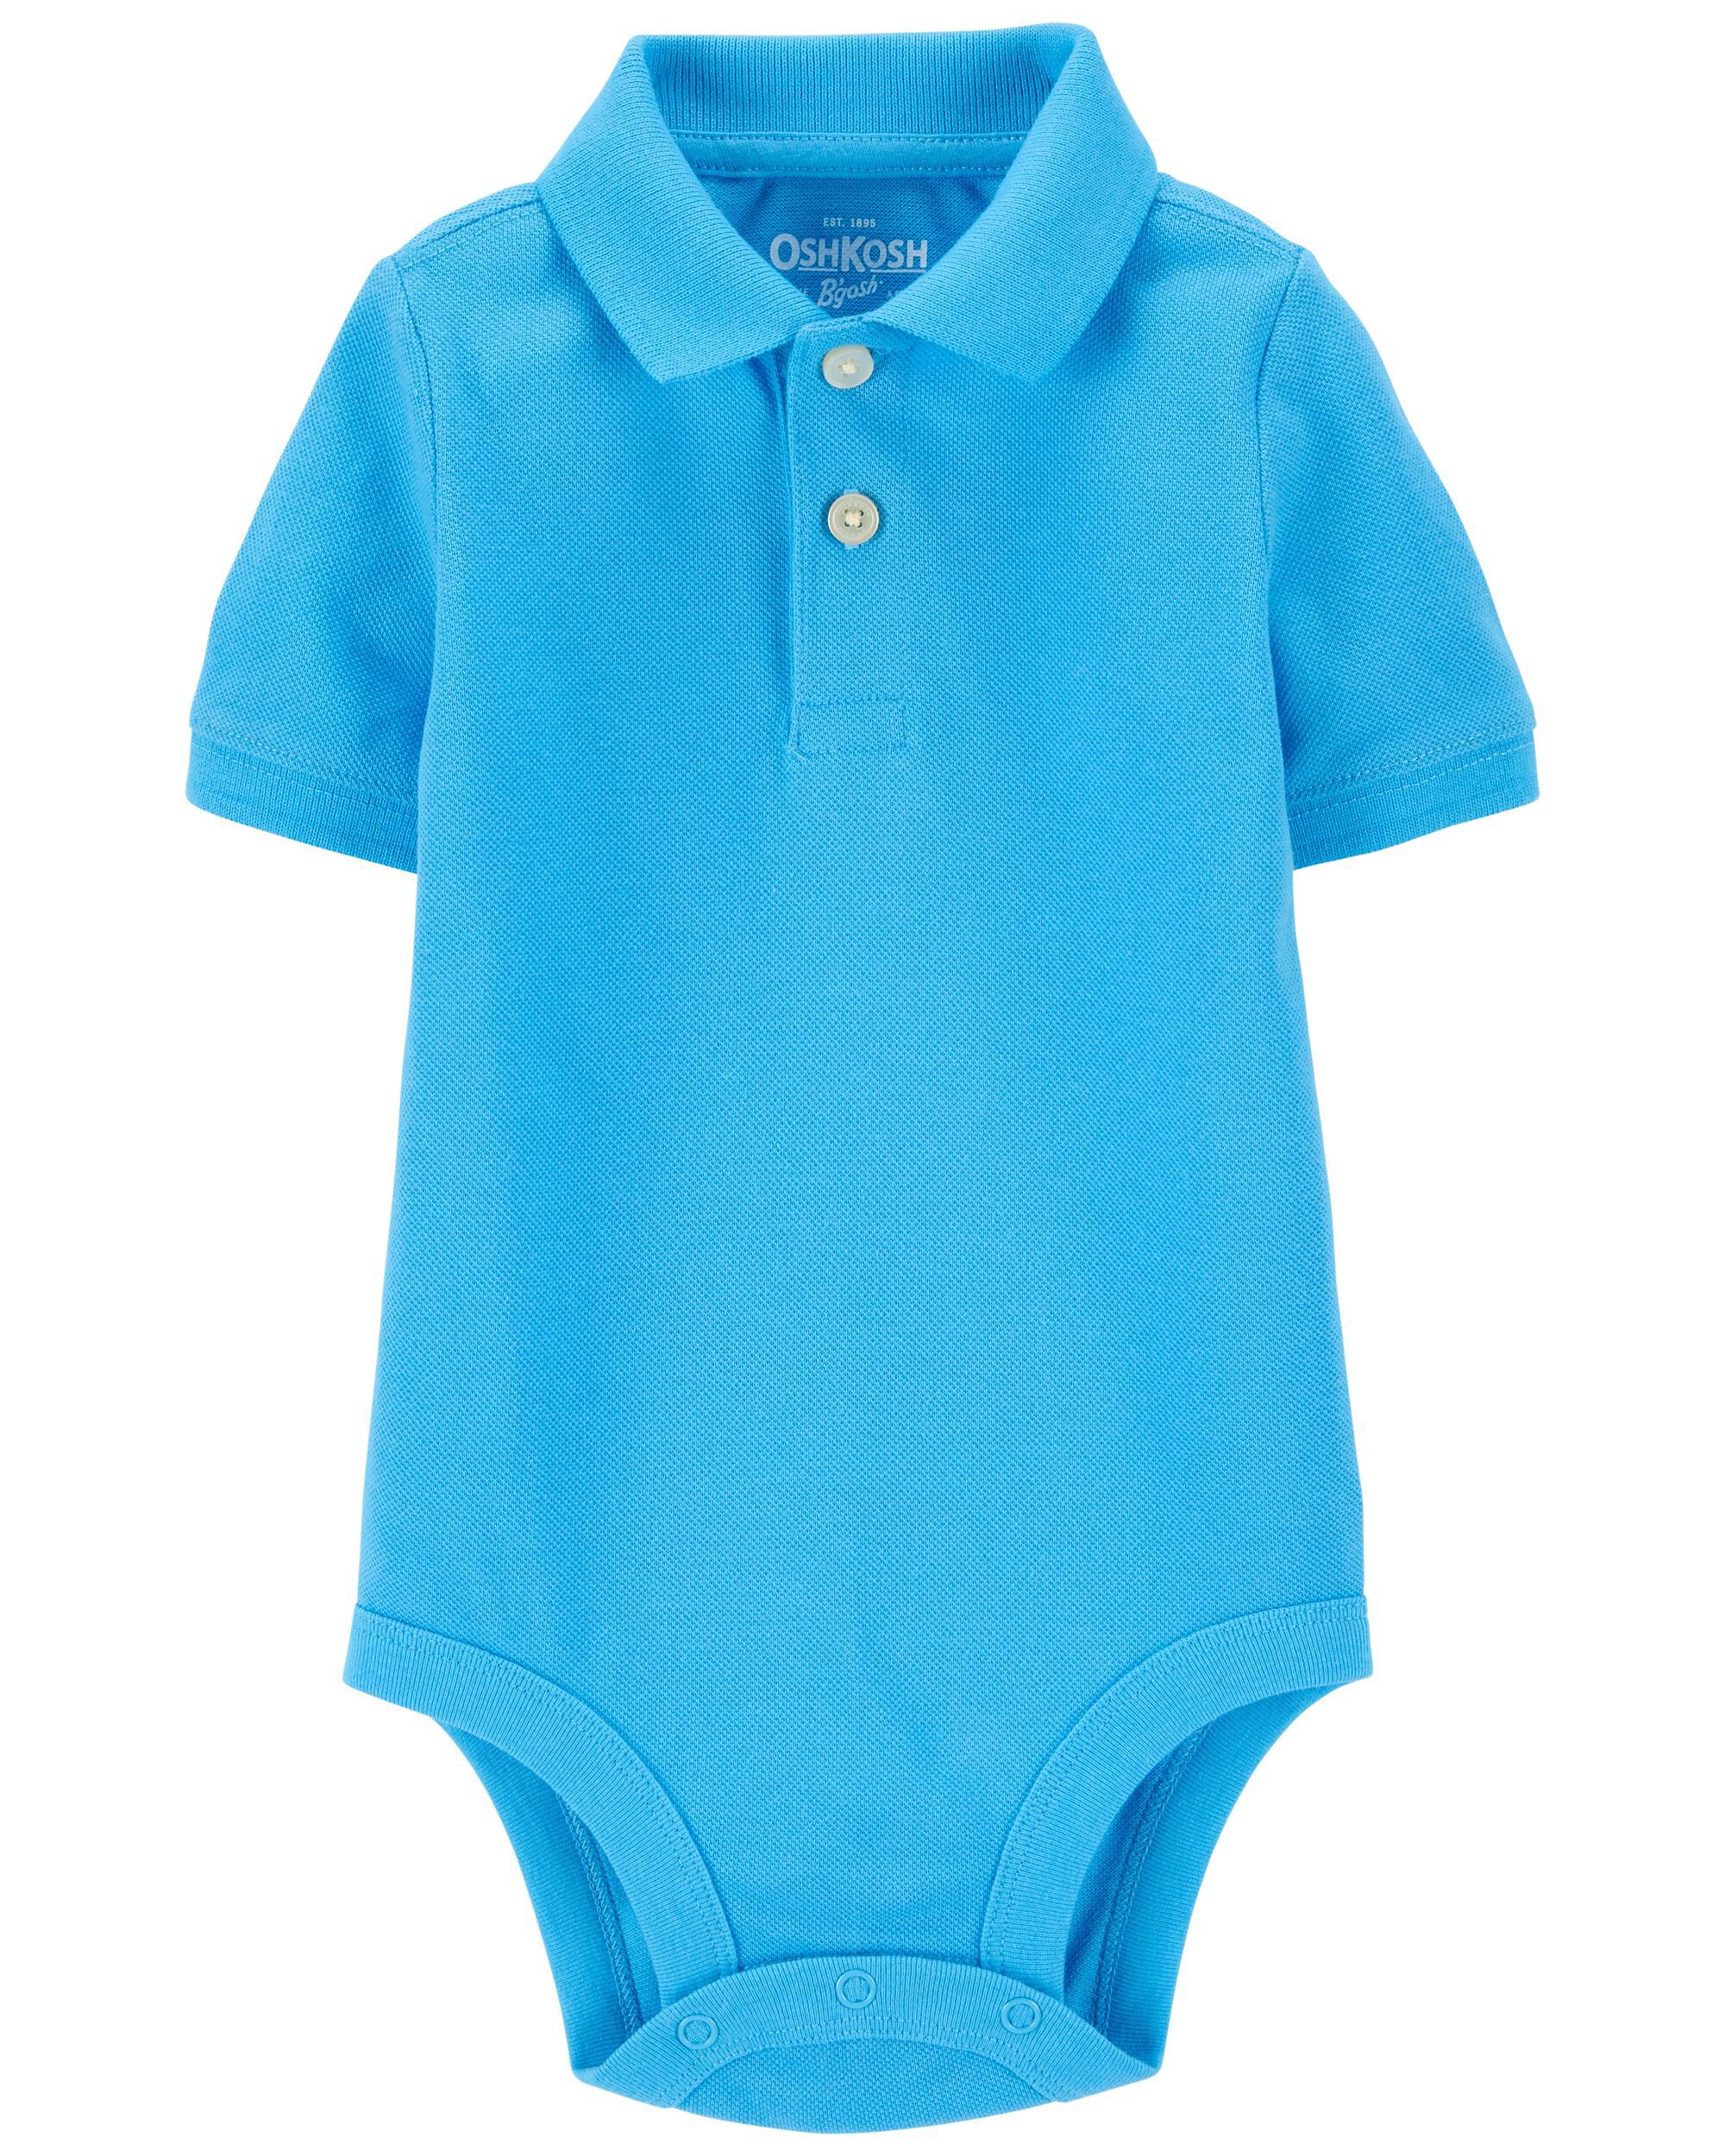 NWT Coral Light Blue Details about   OSHKOSH Infant Boy TWO Short Sleeve Polo Bodysuits 